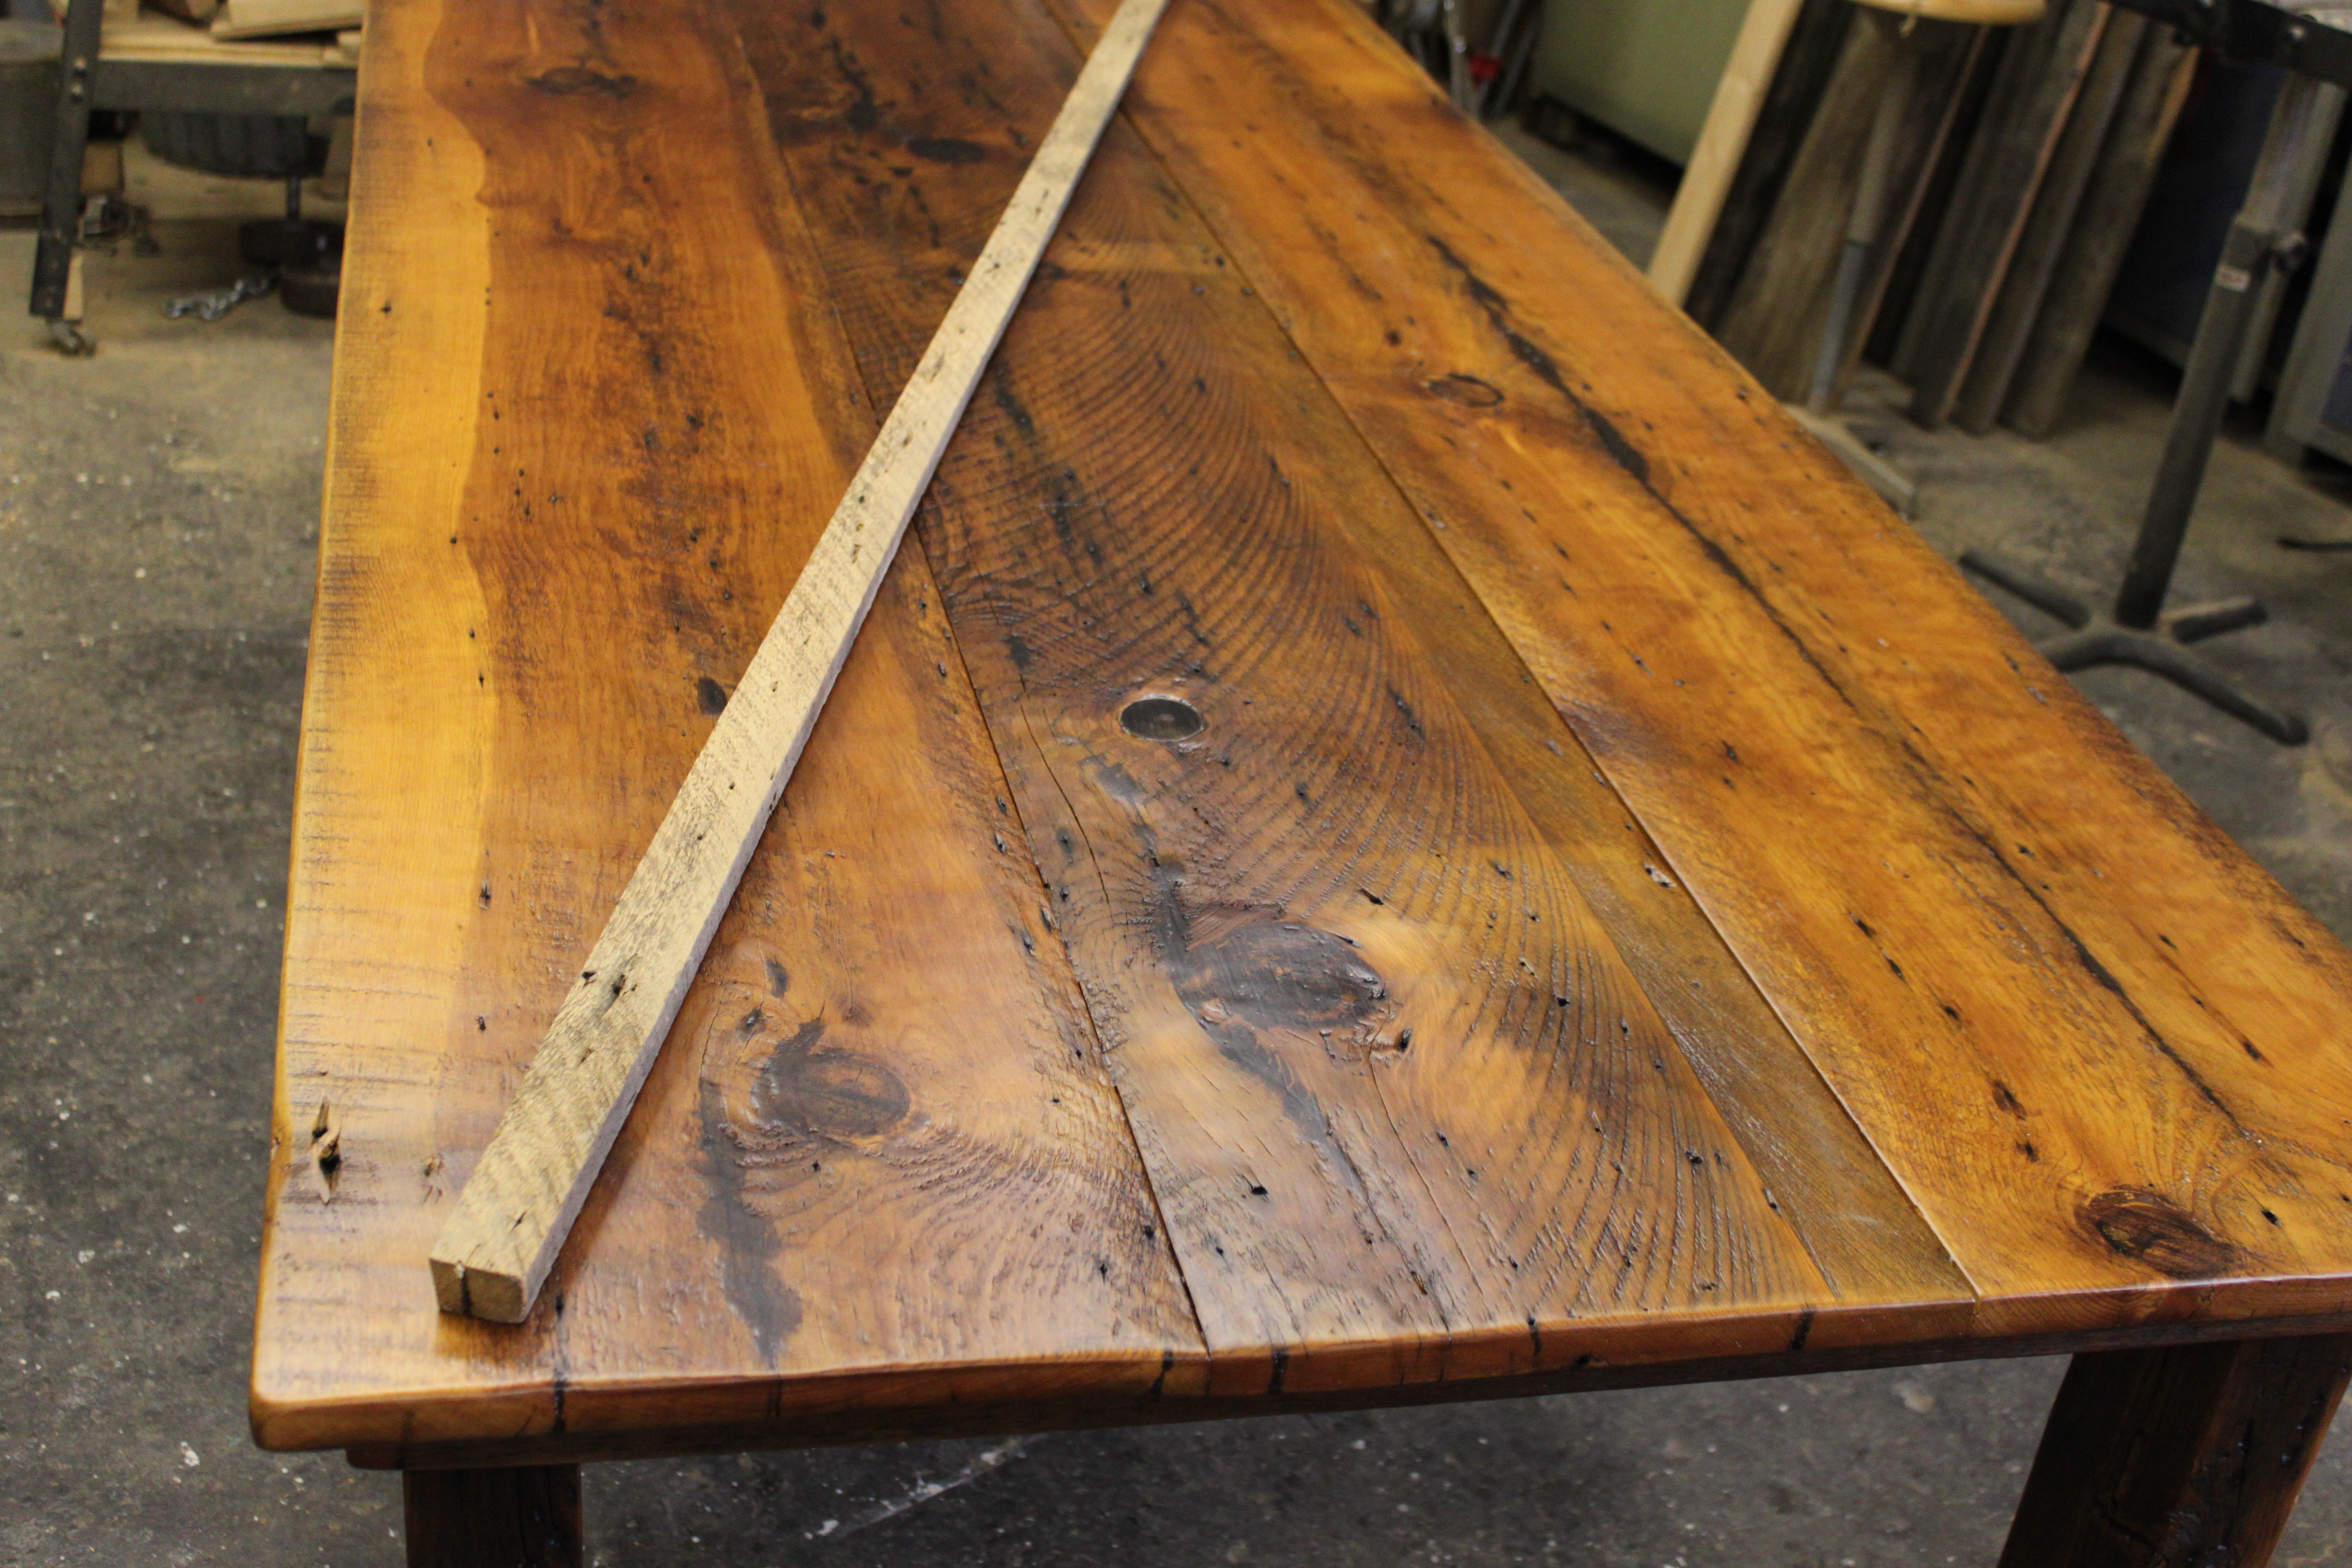 and the beauty of a finished tabletop - this is the exact same wood 